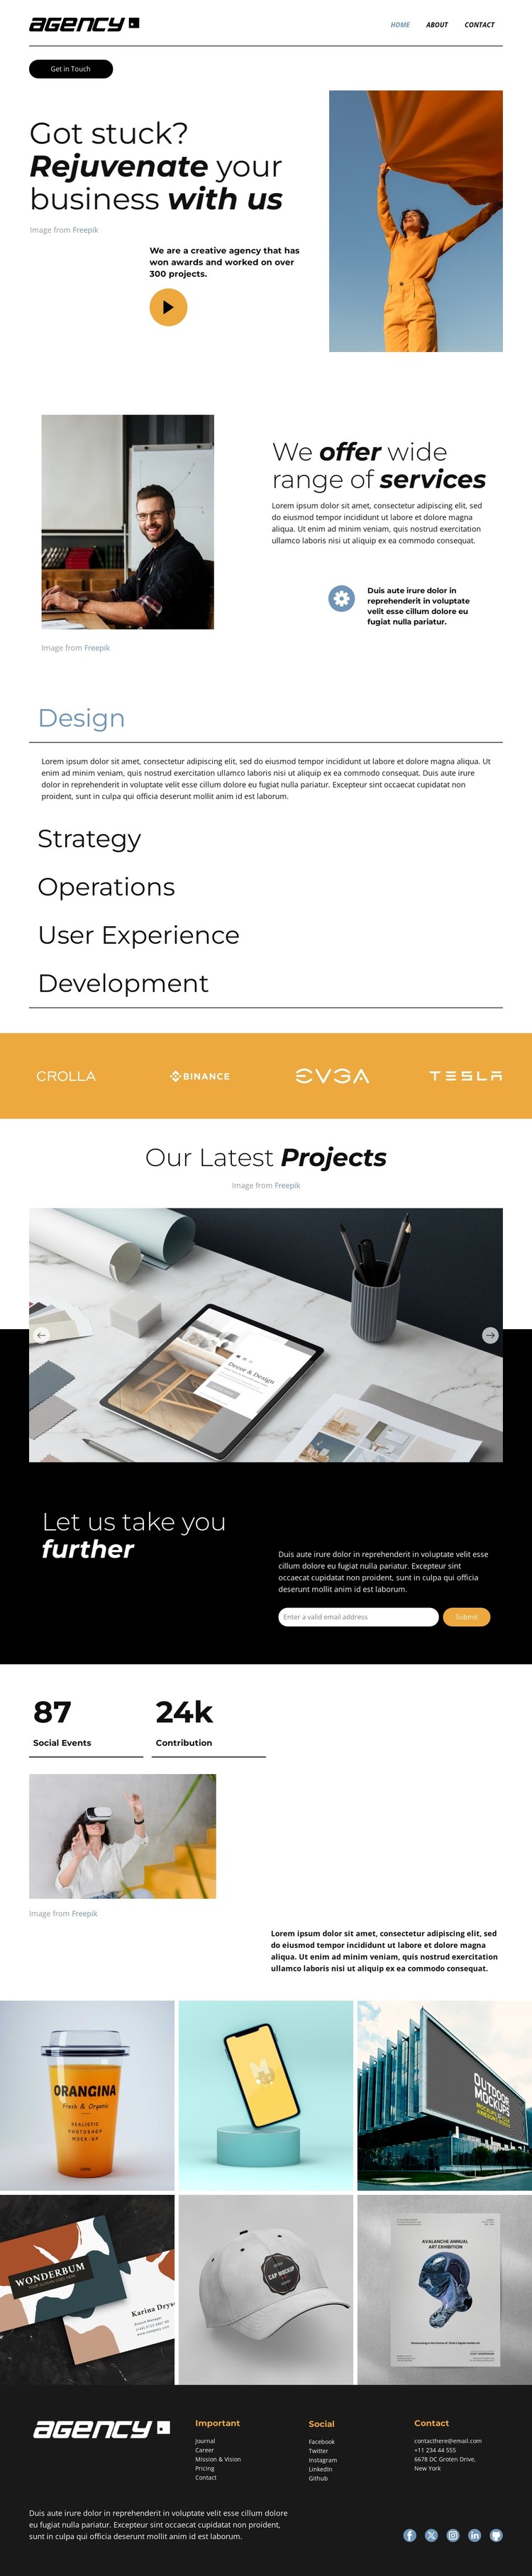 Scale to greater success HTML Template